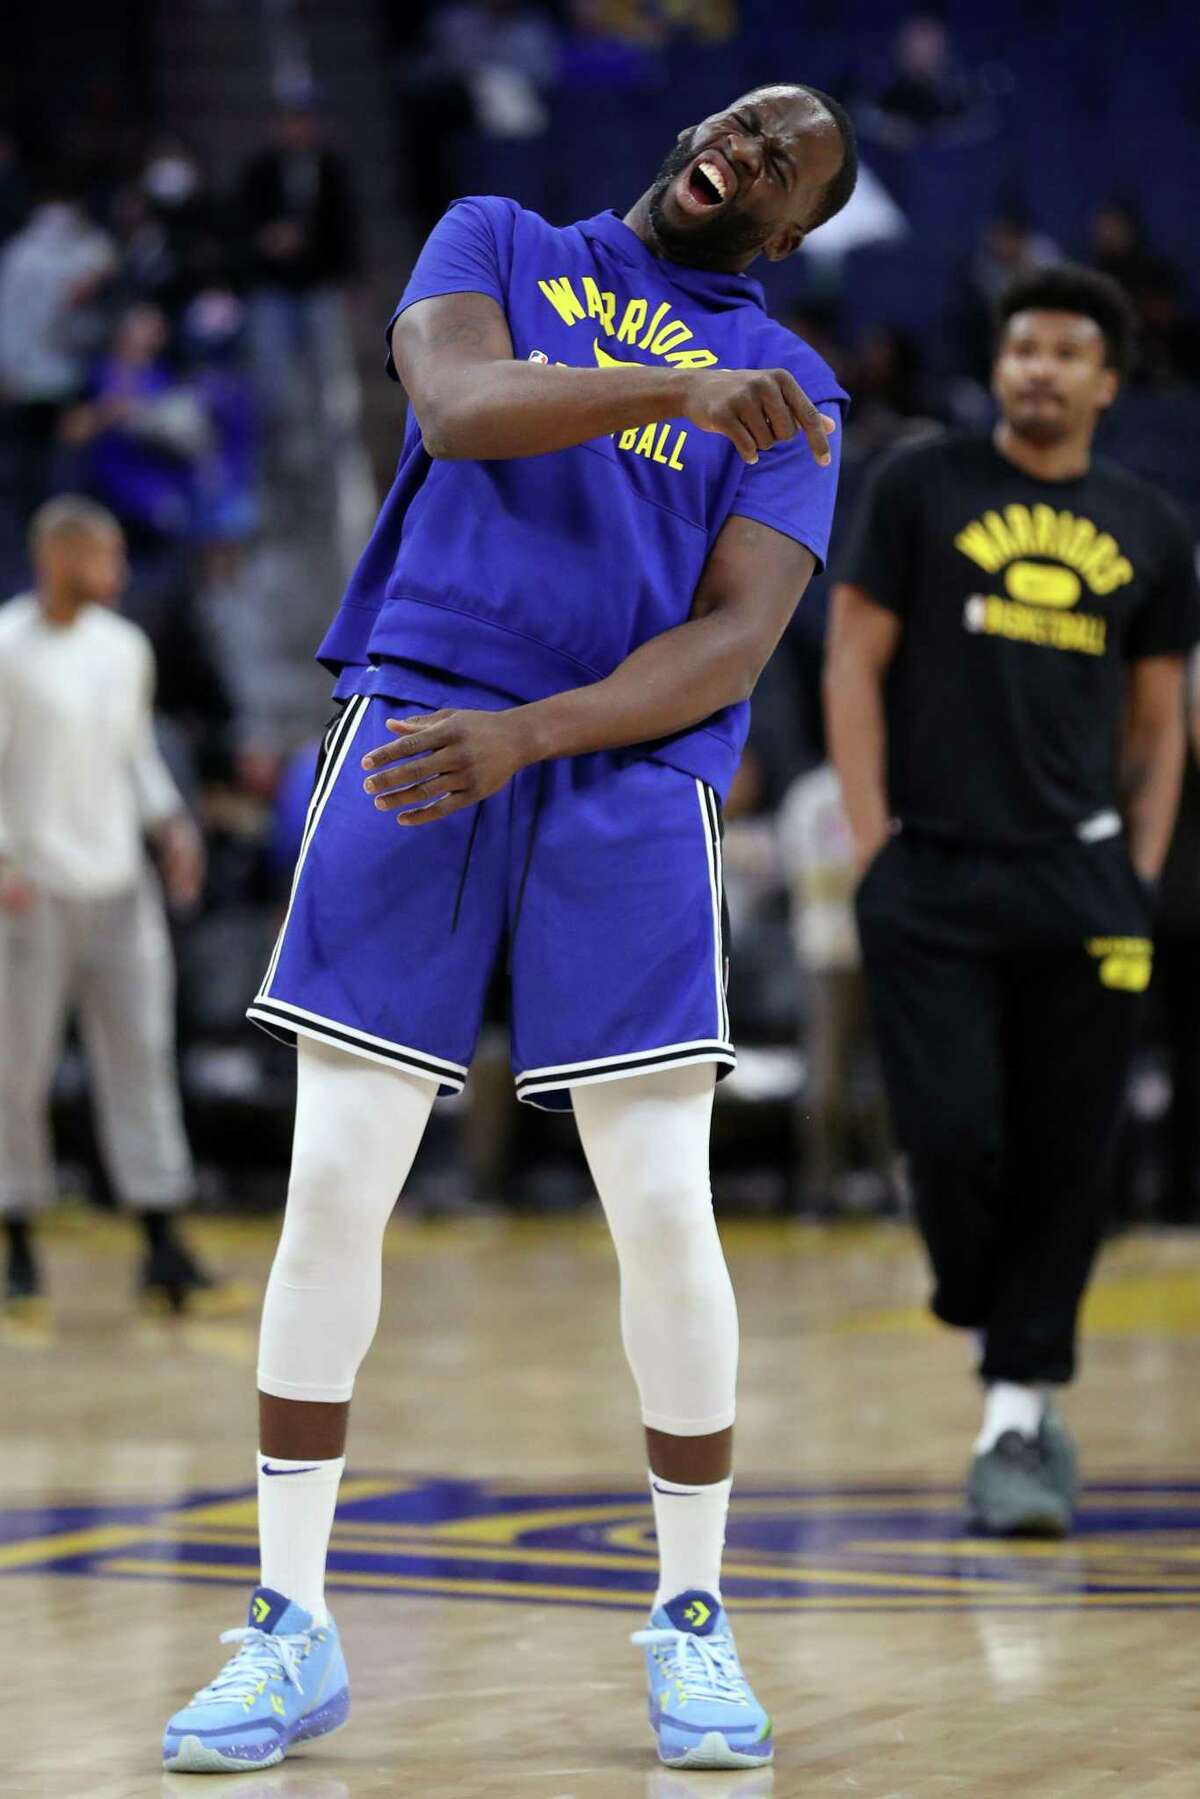 Golden State Warriors' Draymond Green reacts to missing a 3-pointer while warming up before playing Washington Wizards during NBA game at Chase Center in San Francisco, Calif., on Monday, March 14, 2022.